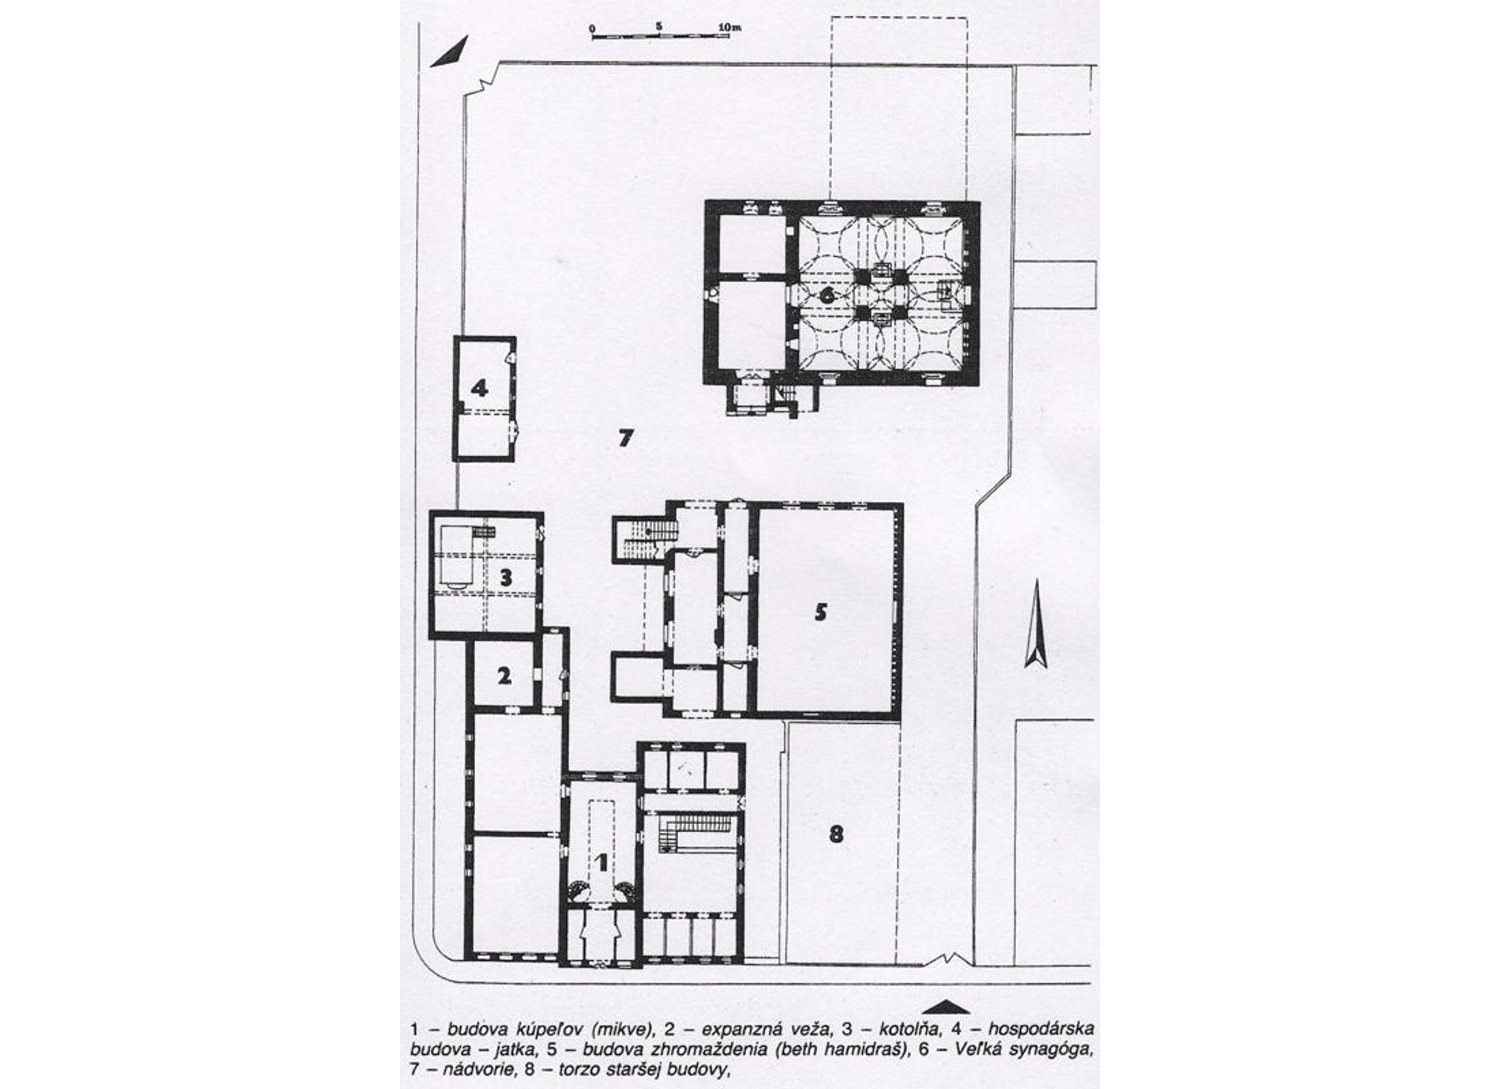 Mikvah and Suburbia floor plan